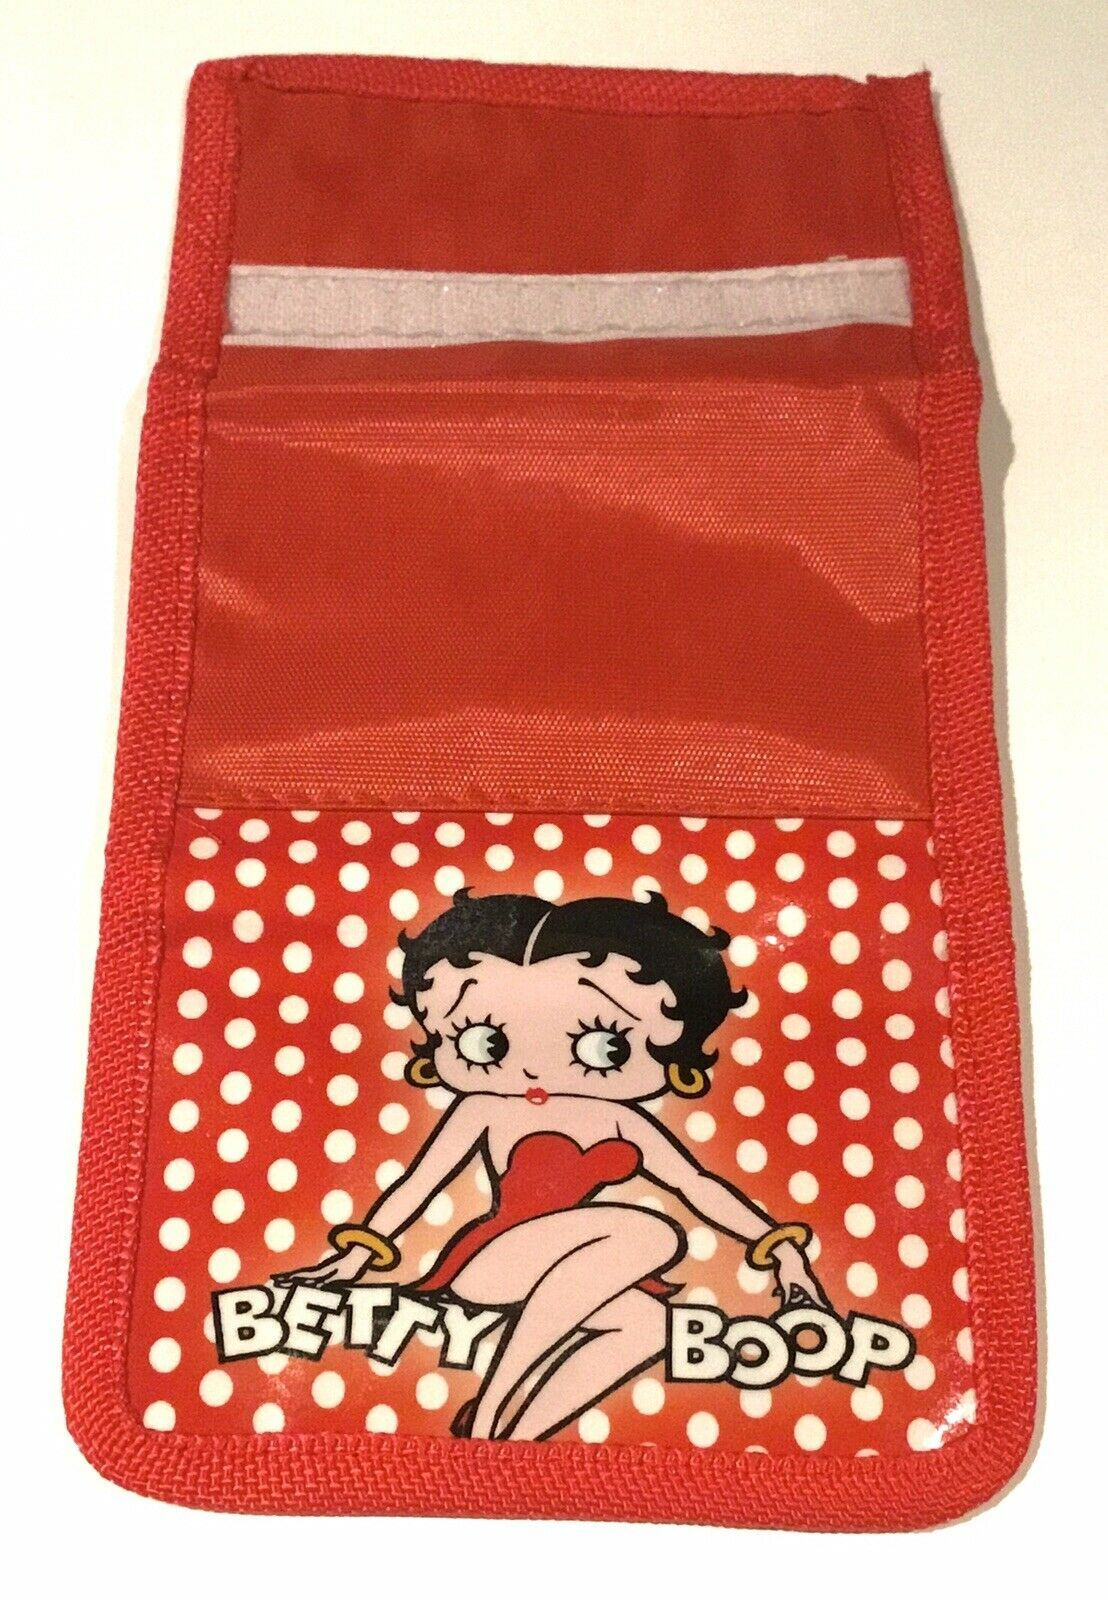 BETTY BOOP KEY RING OFFICIAL WITH A FREE WALLET JUST ARRIVED RED BB